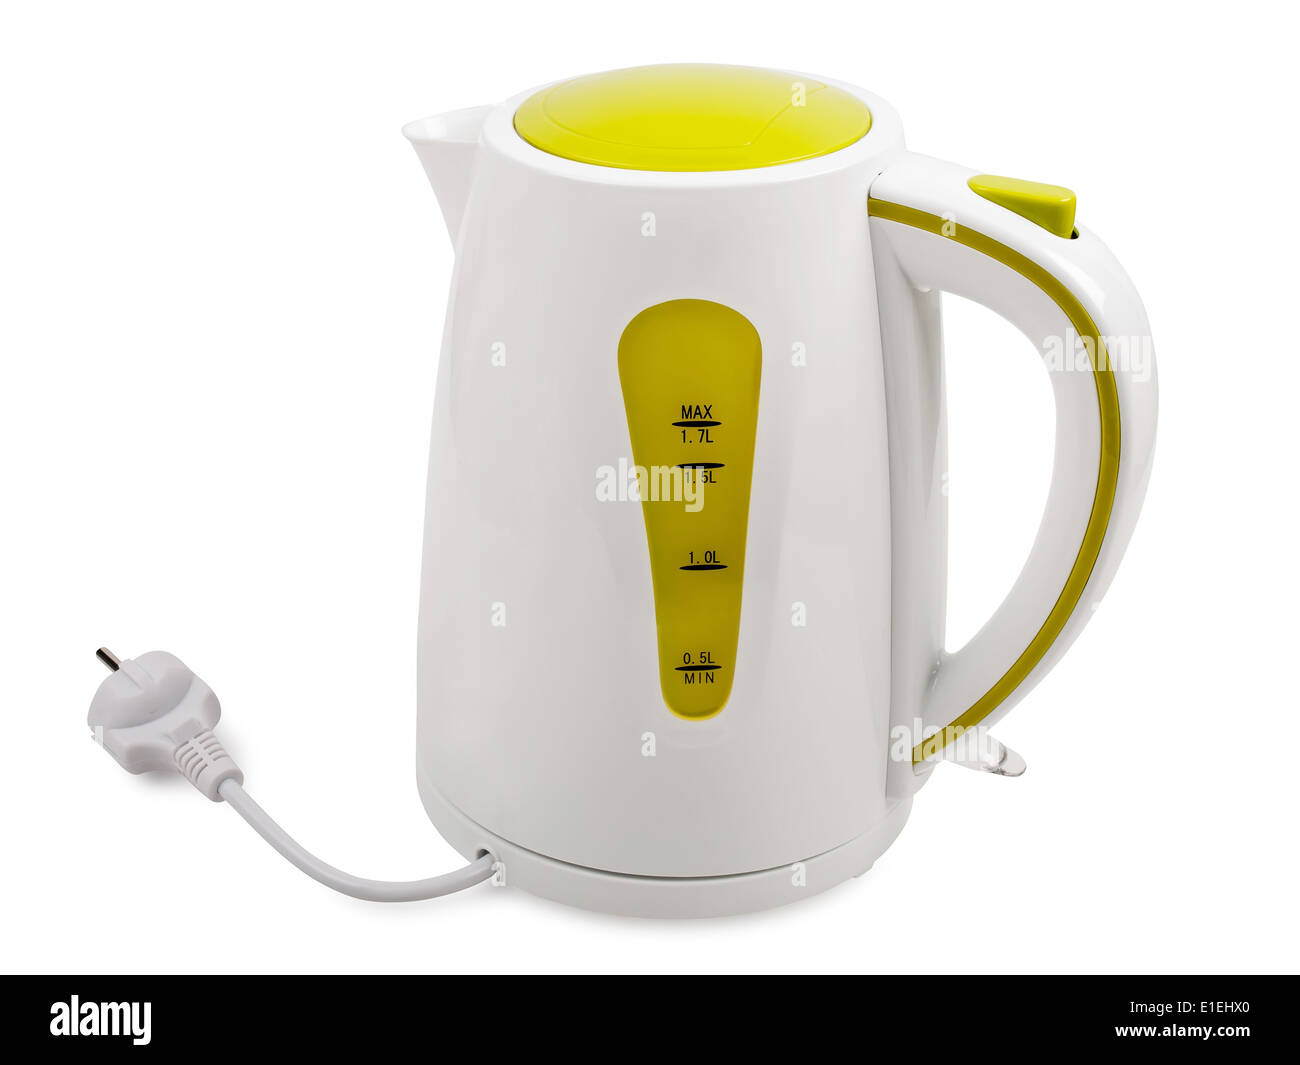 https://c8.alamy.com/comp/E1EHX0/electric-kettle-isolated-on-white-background-E1EHX0.jpg